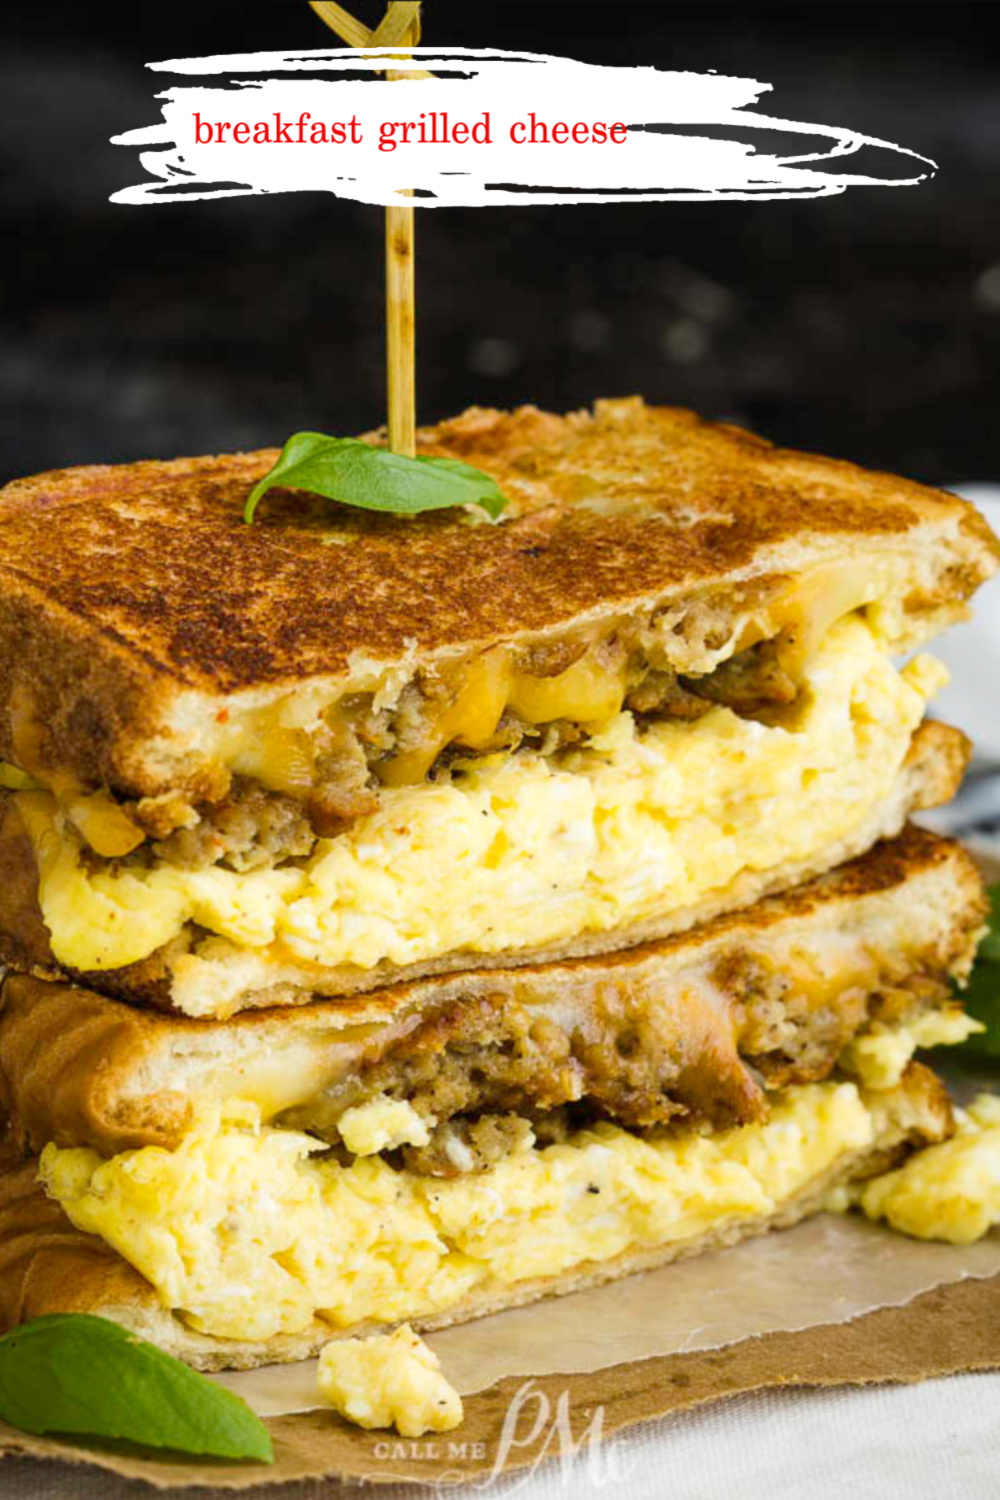 A savory, indulgent sandwich, Breakfast Grilled Cheese Recipe with soft scrambled eggs and sausage, will have you looking forward to breakfast. #breakfast #eggs #scrambledeggs #sauasage #grilledcheese #recipe